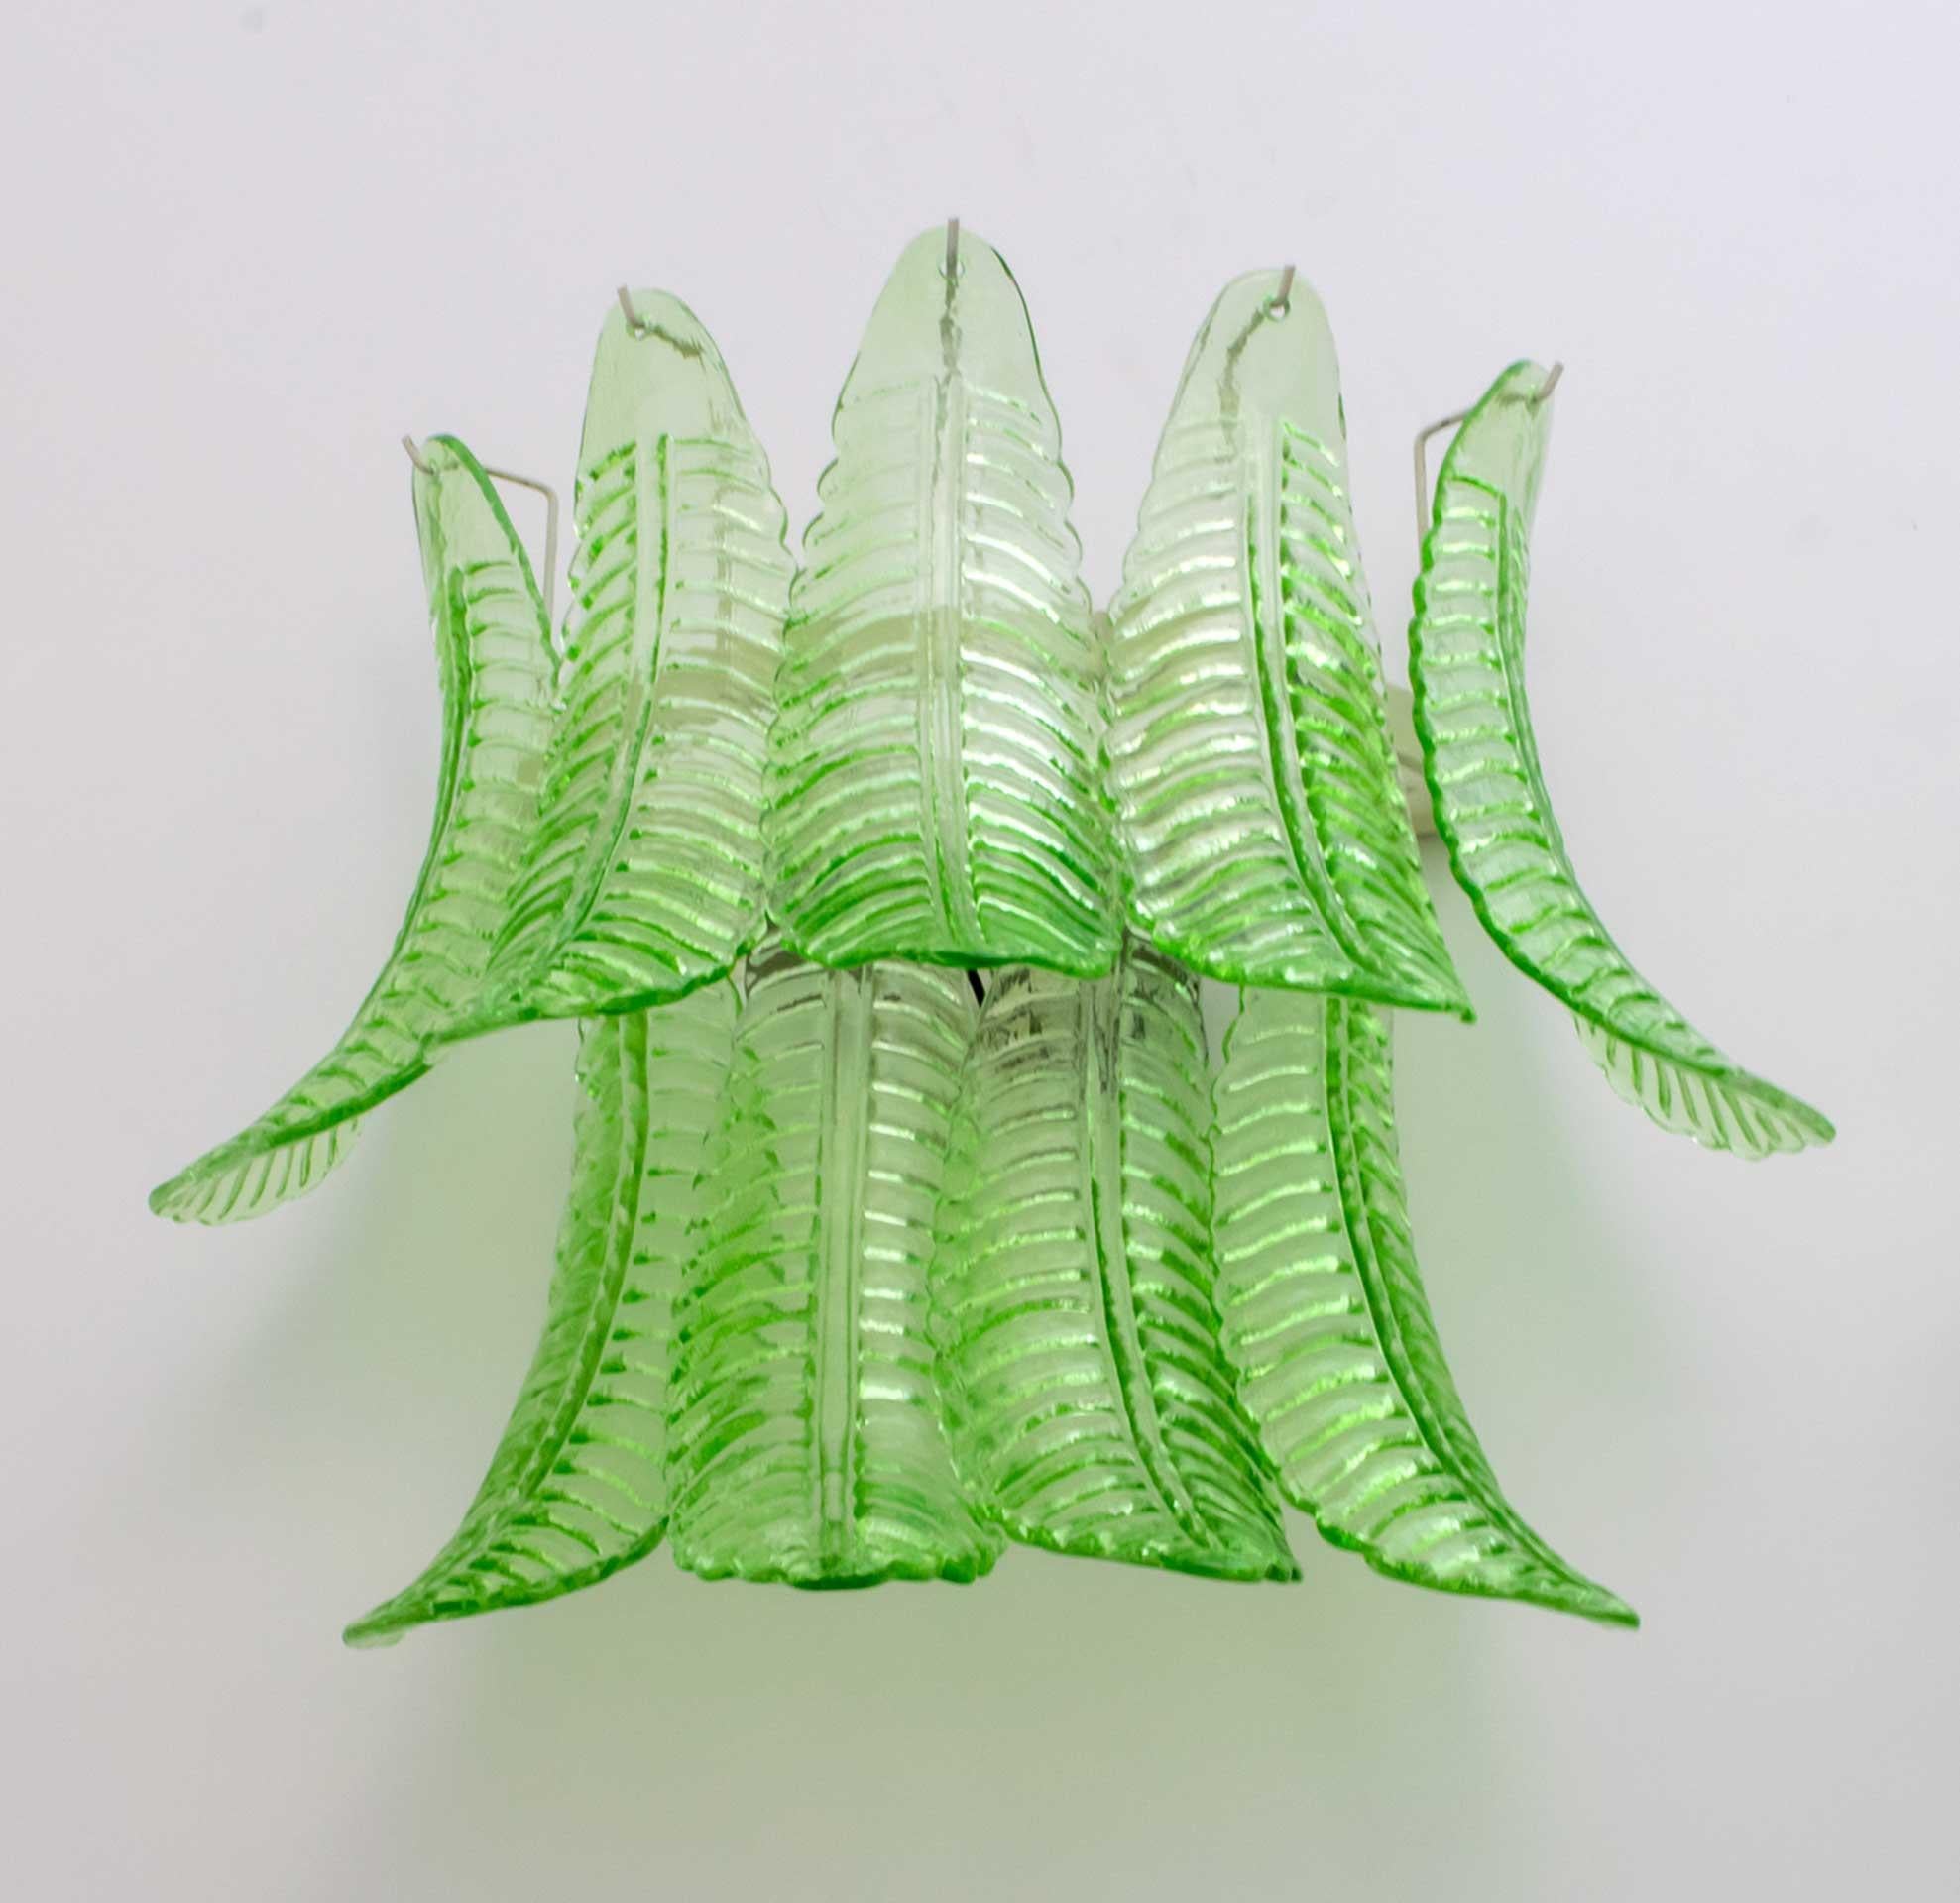 Pair of Mid-Century Modern Italian Murano Glass Palm Leaf Sconces, 1970s For Sale 1